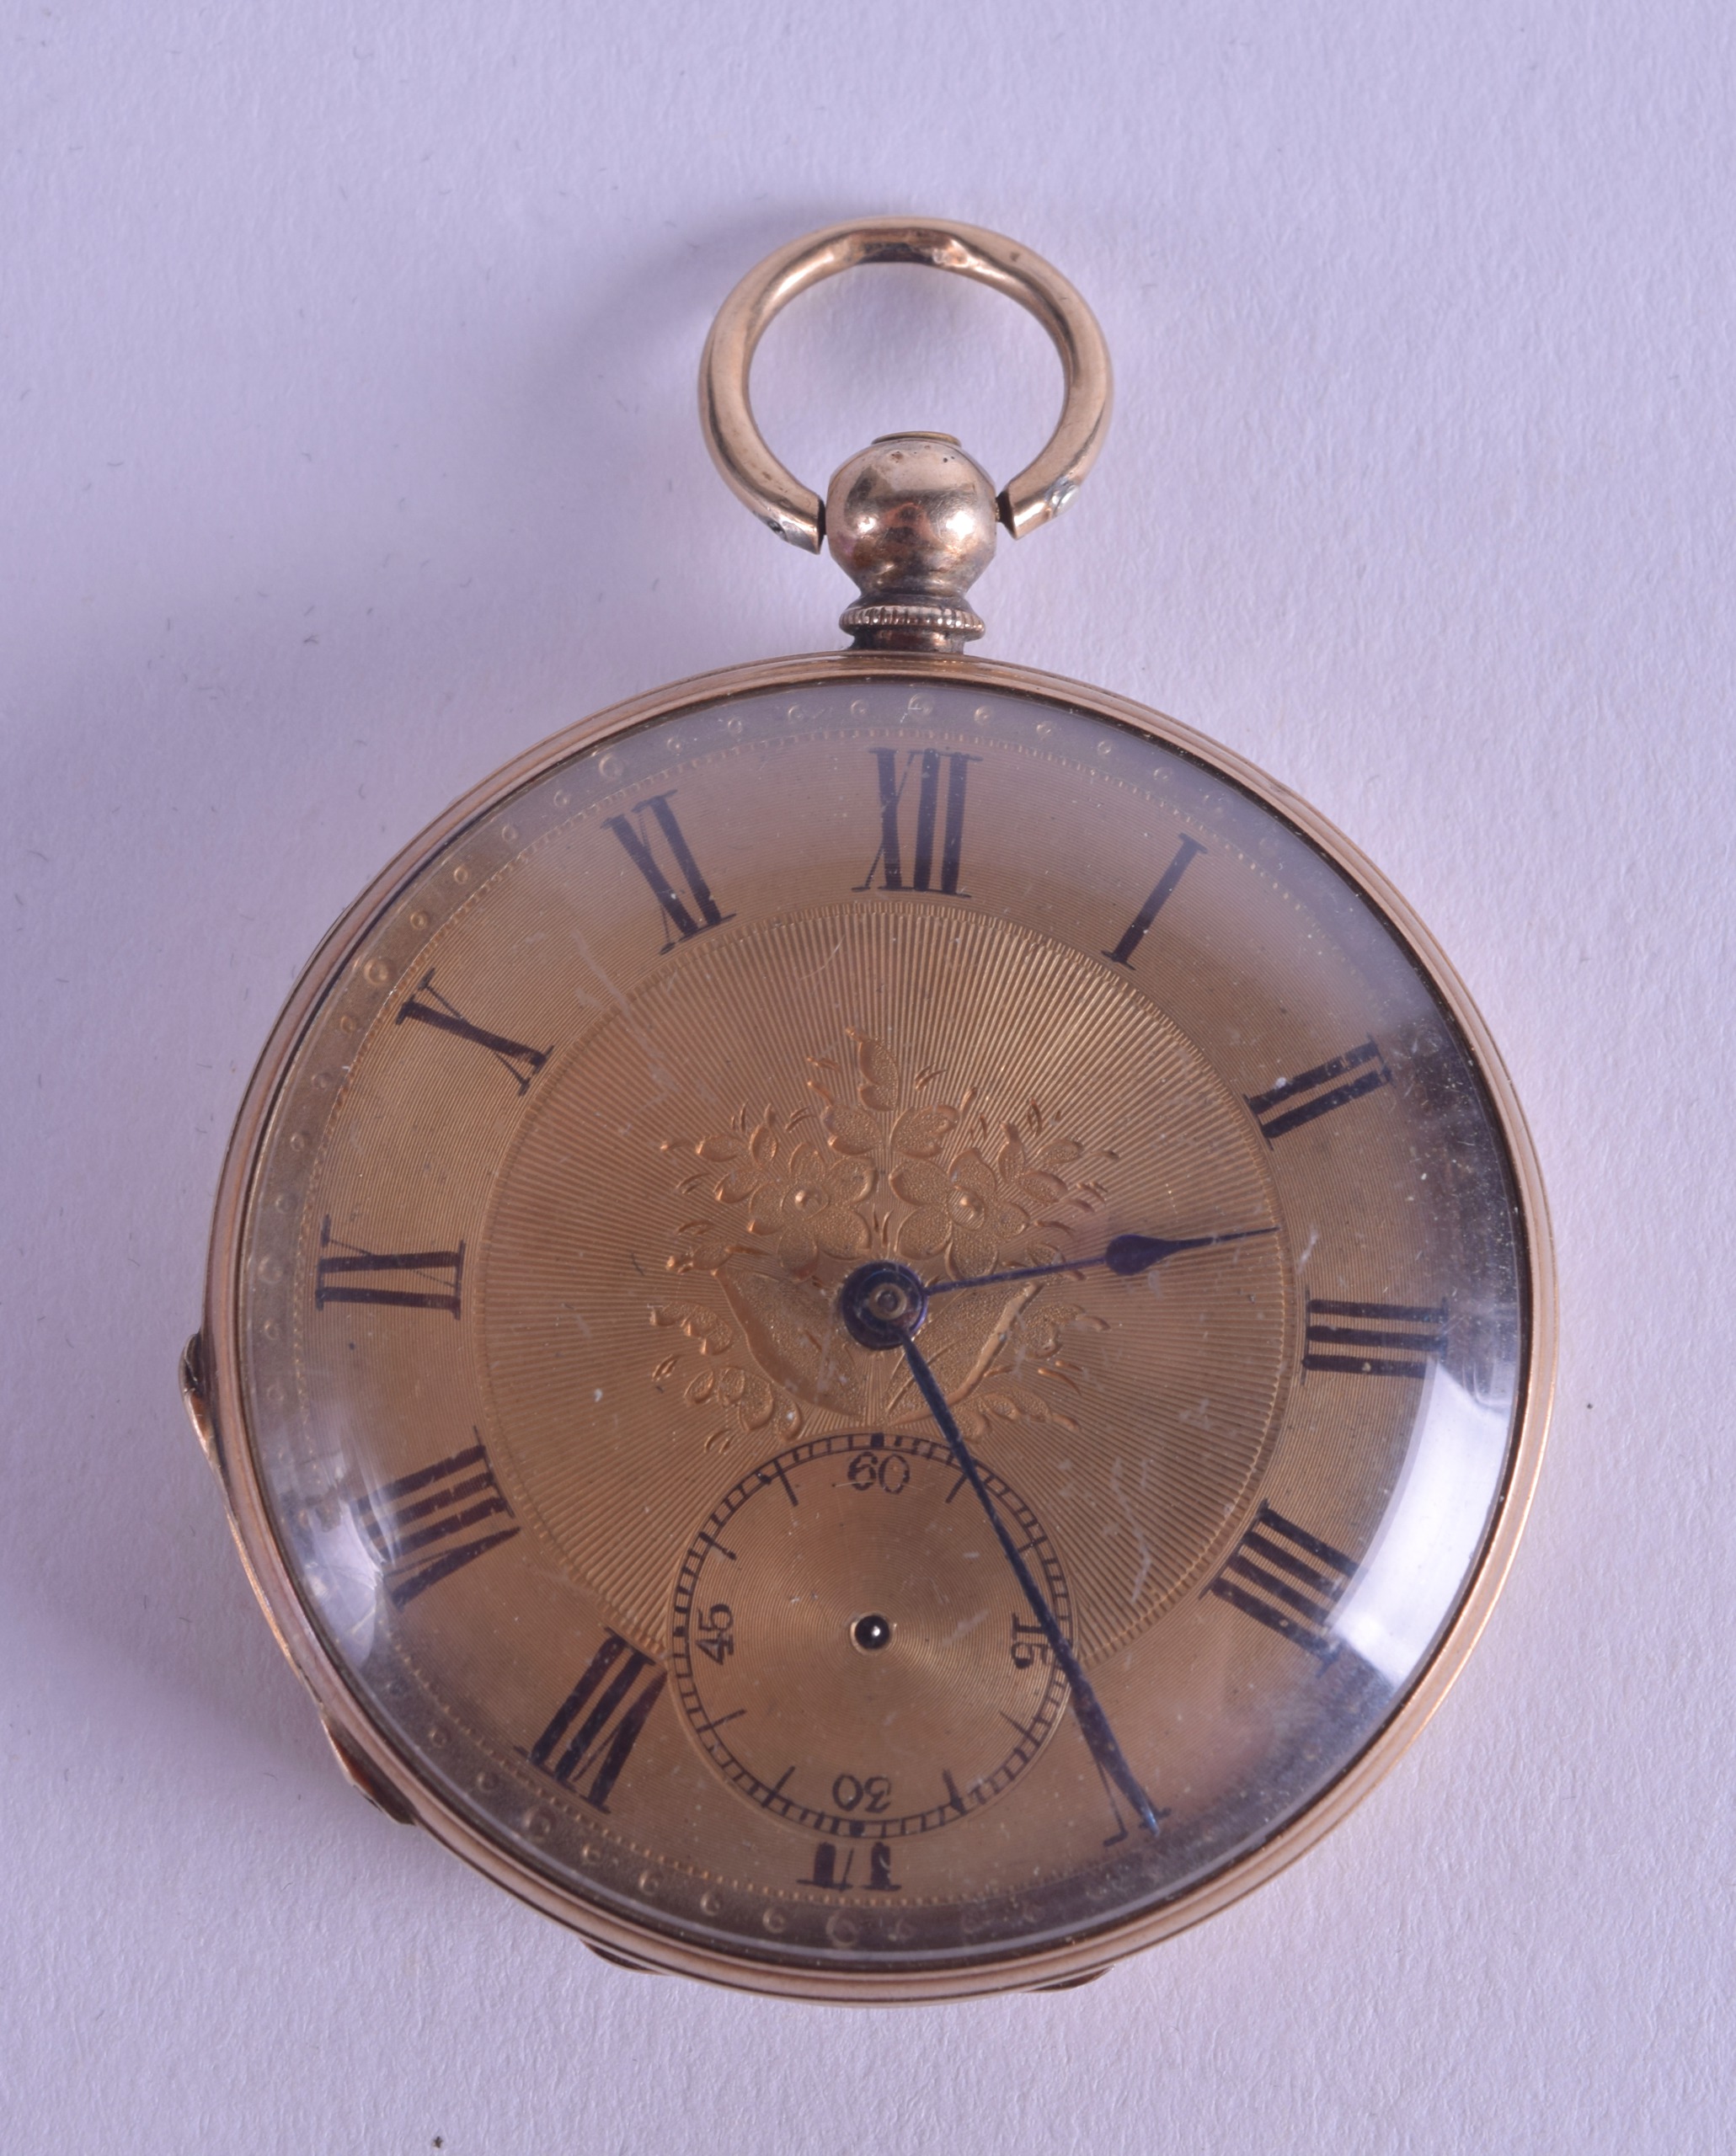 AN ANTIQUE YELLOW METAL POCKET WATCH with gilt dial and black numerals. 4.5 cm diameter.